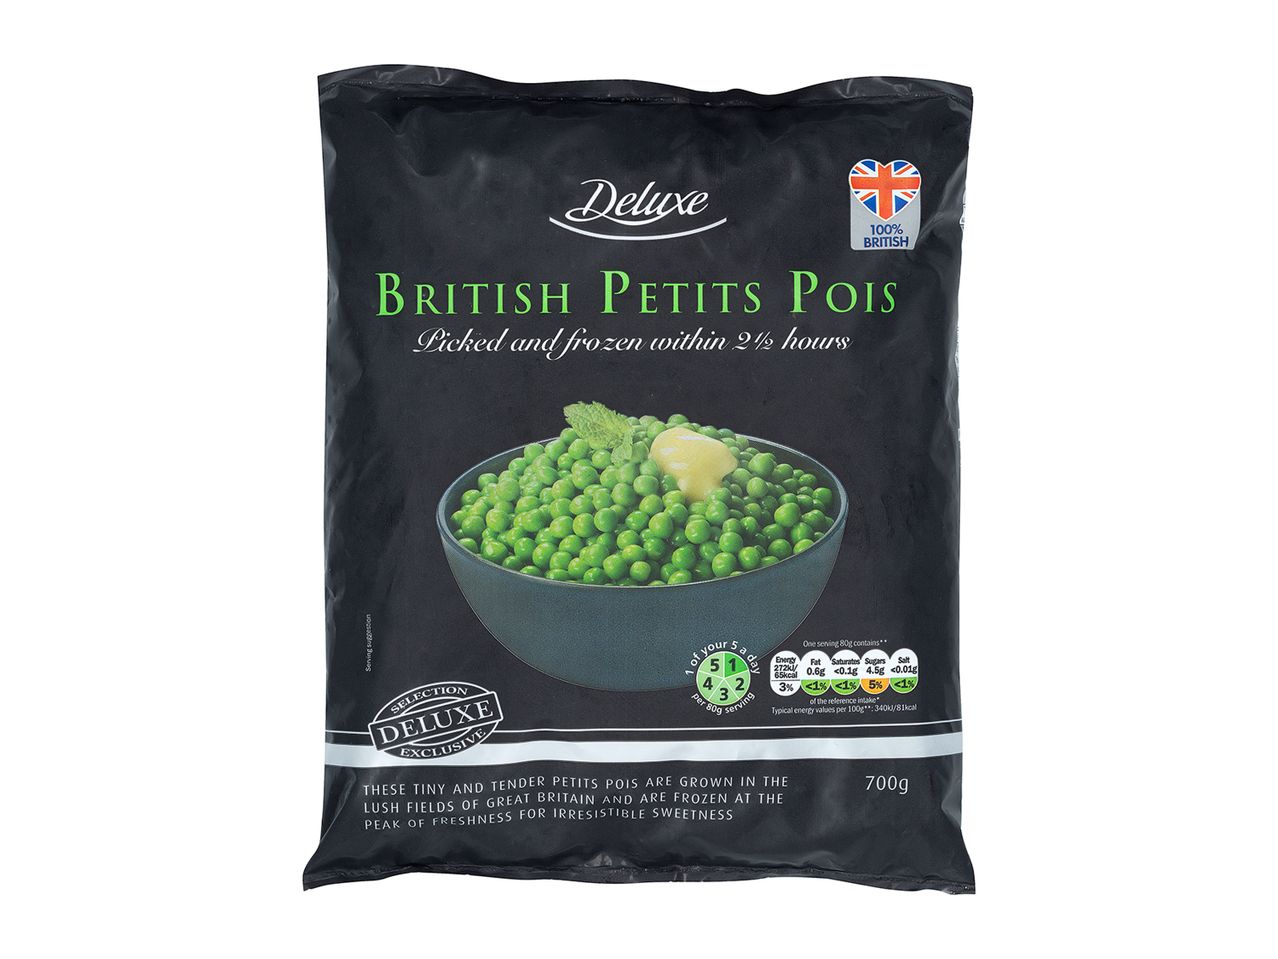 Go to full screen view: Deluxe British Petit Pois - Image 1